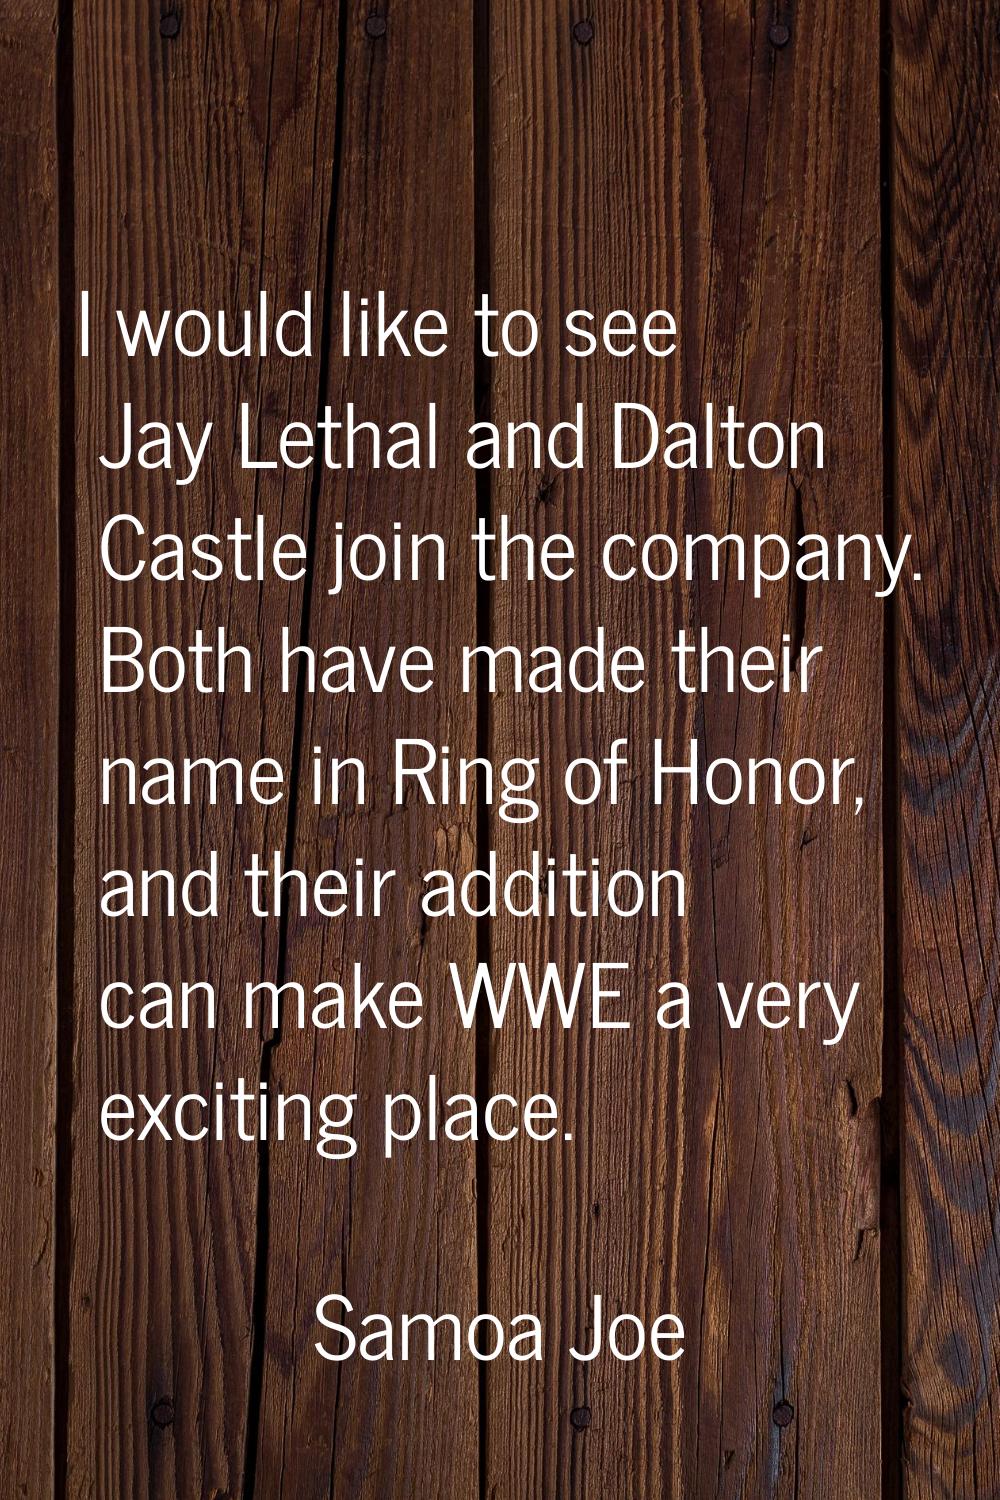 I would like to see Jay Lethal and Dalton Castle join the company. Both have made their name in Rin